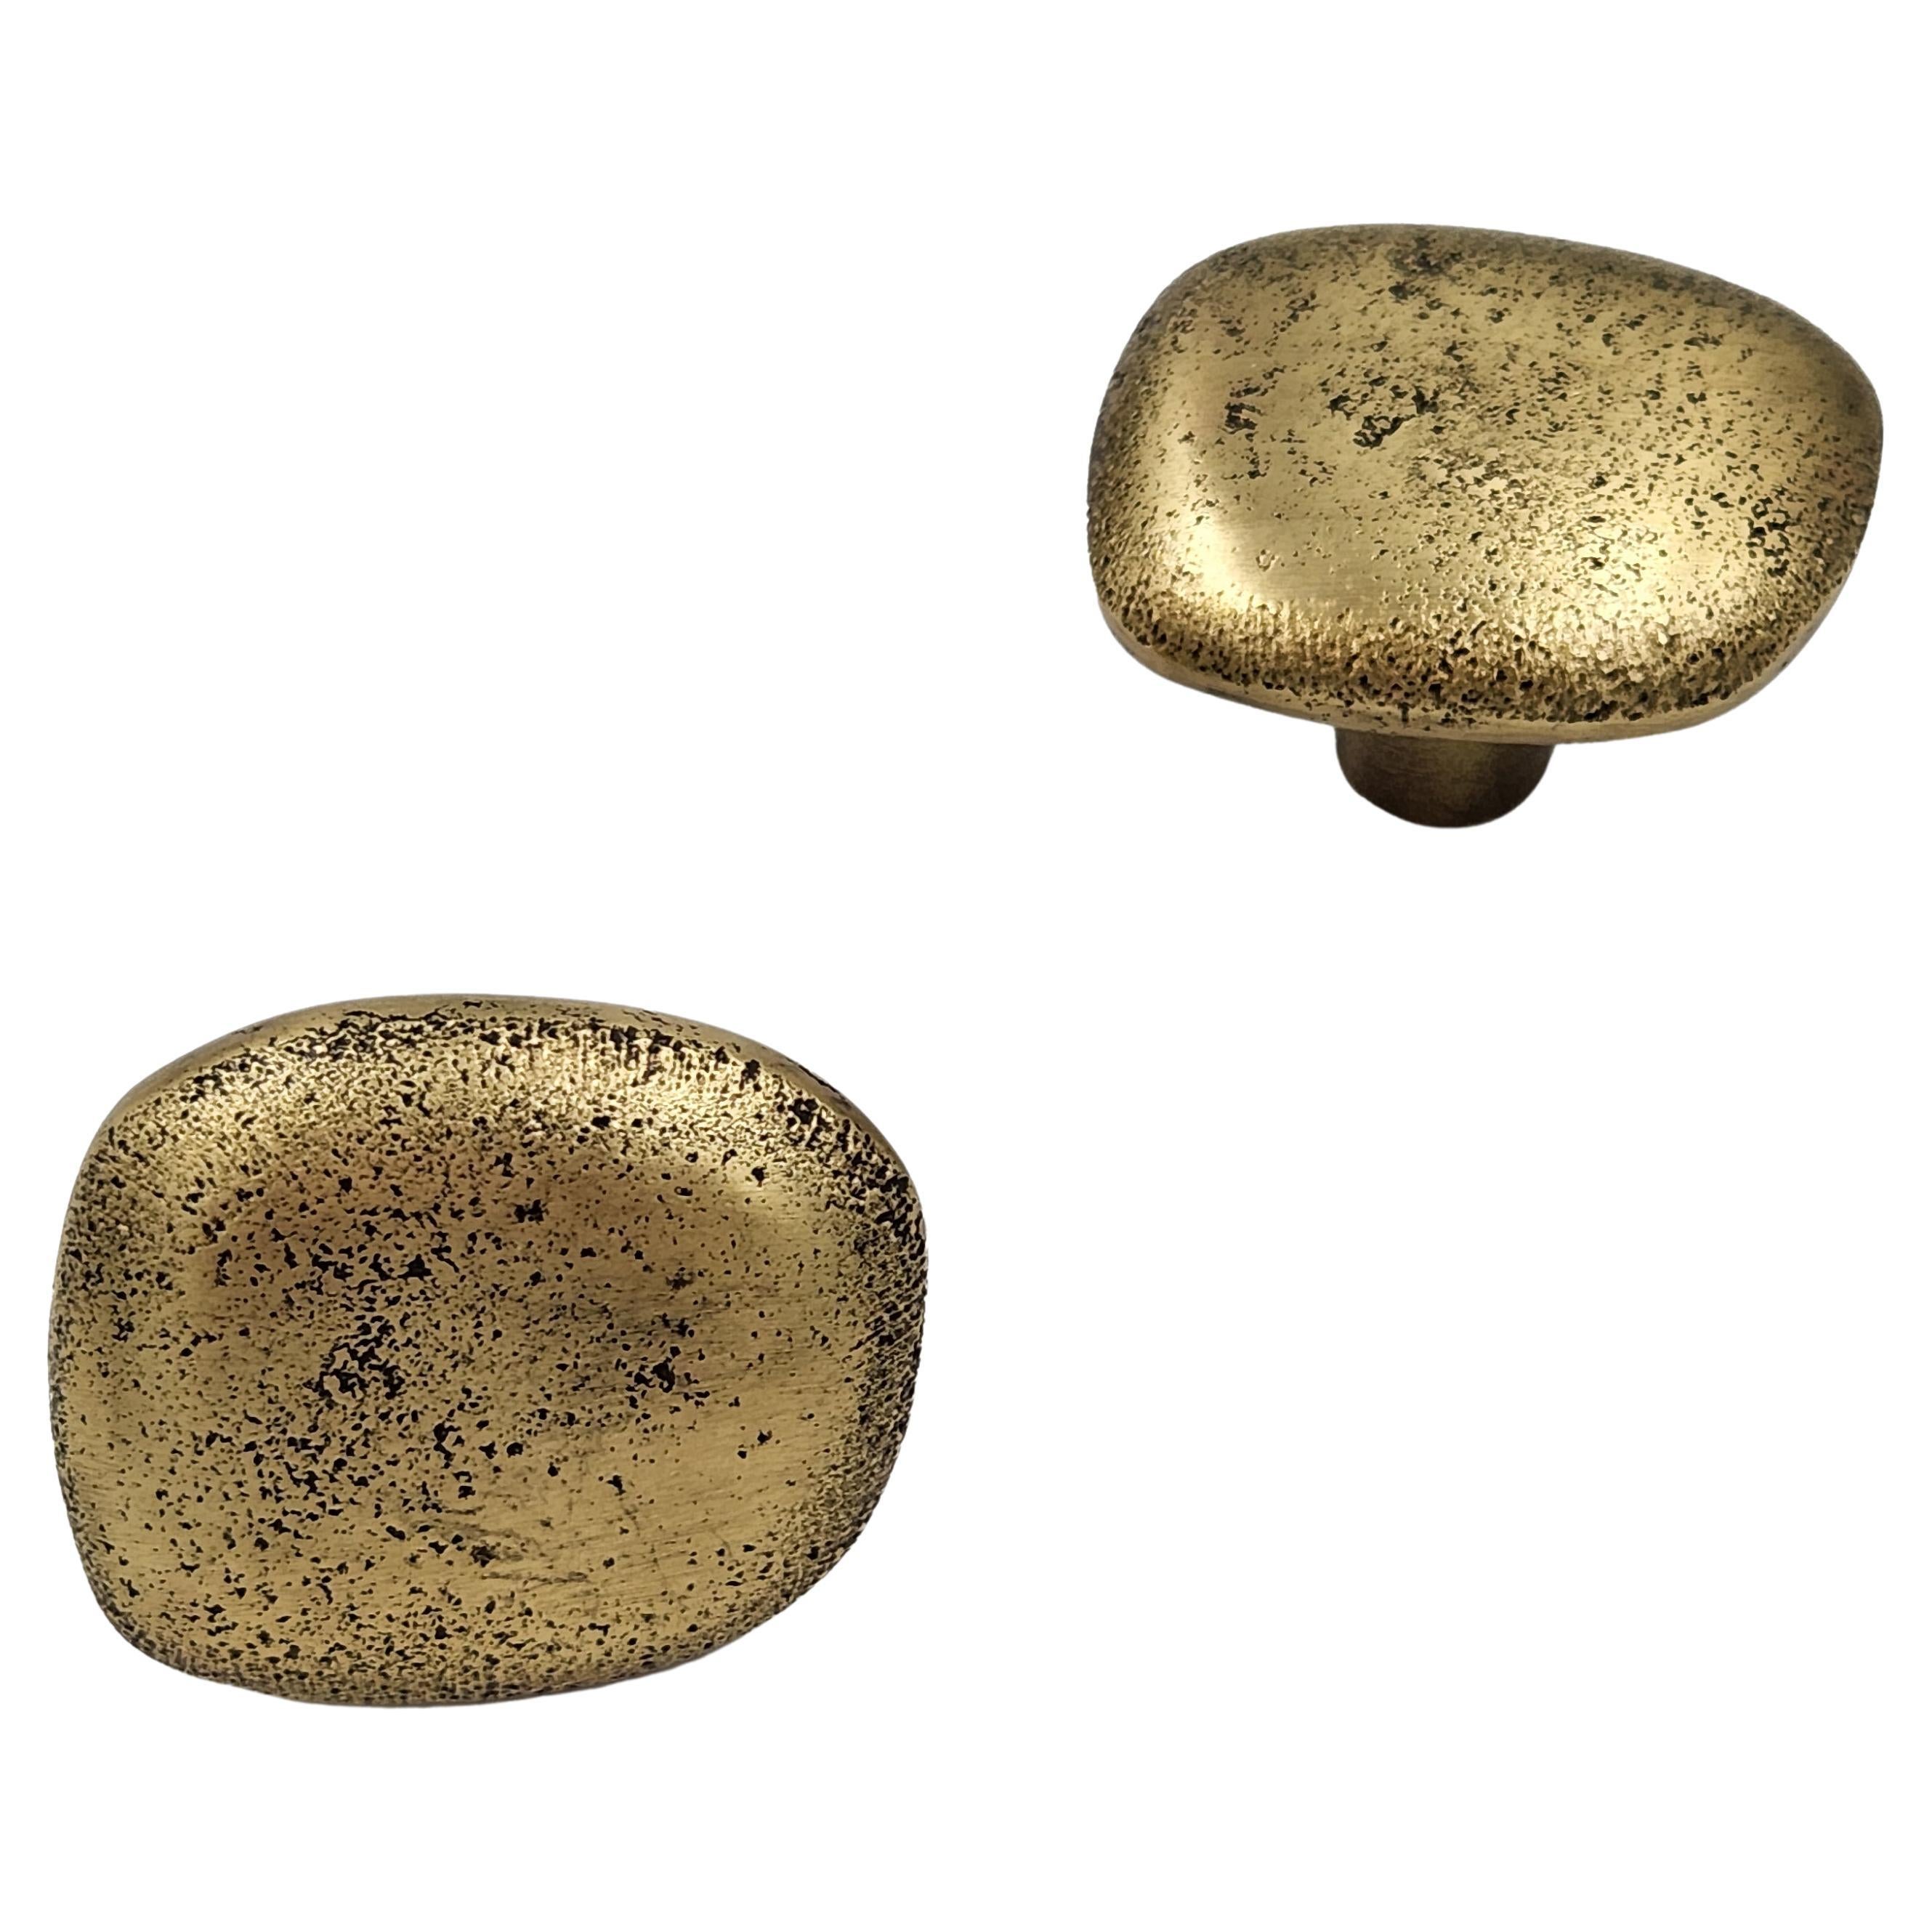 Solid Brass Door Knobs Mineral Inspiration 4 x 4 cm For Sale